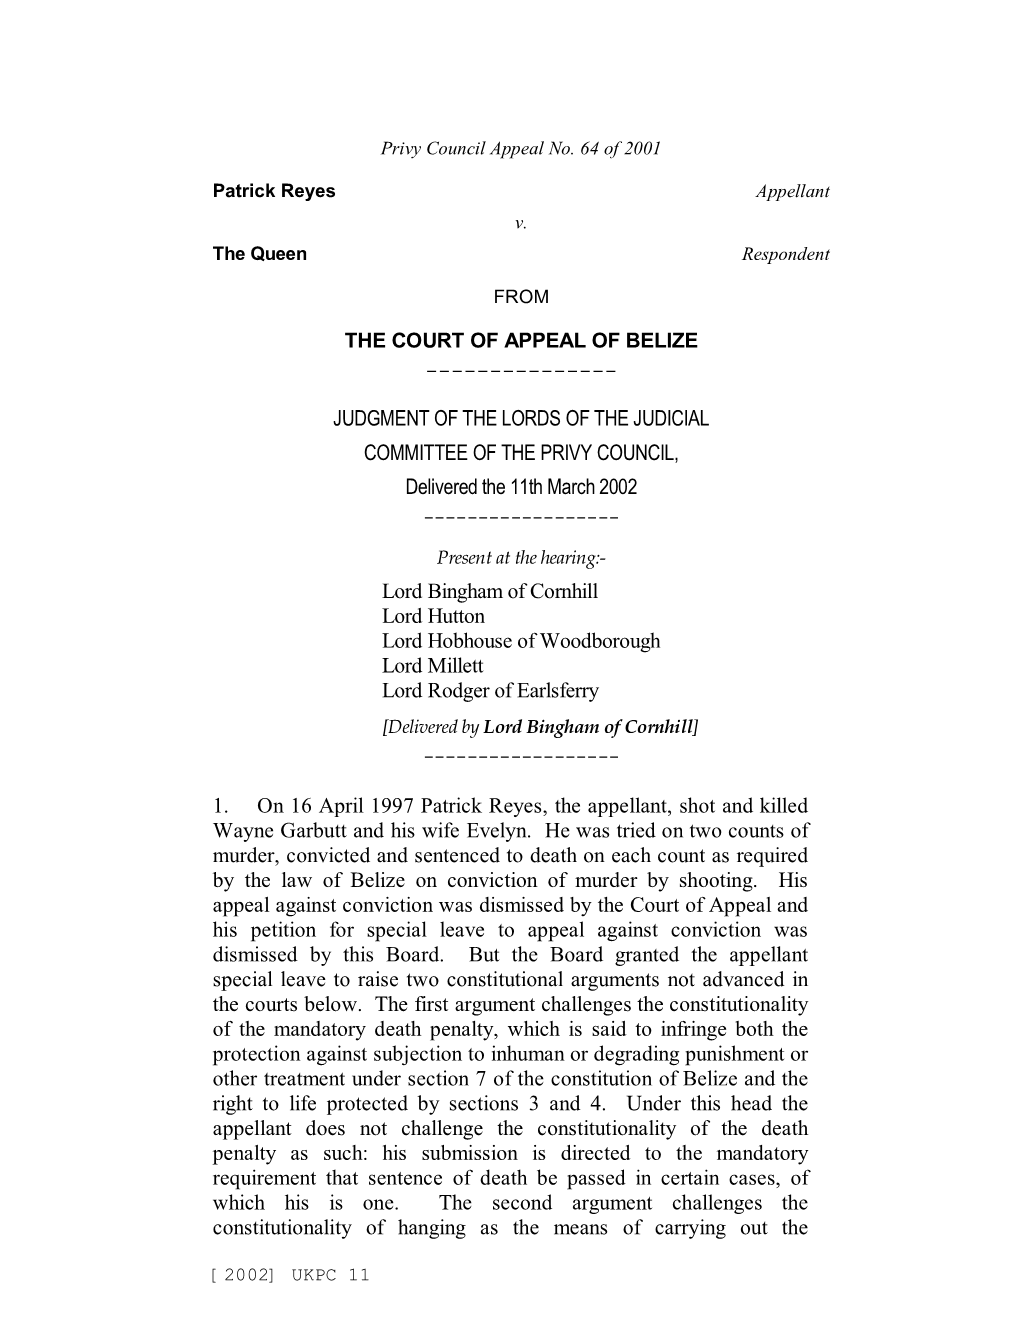 Privy Council Appeal No.64 of 2001-Patrick Reyes and the Queen